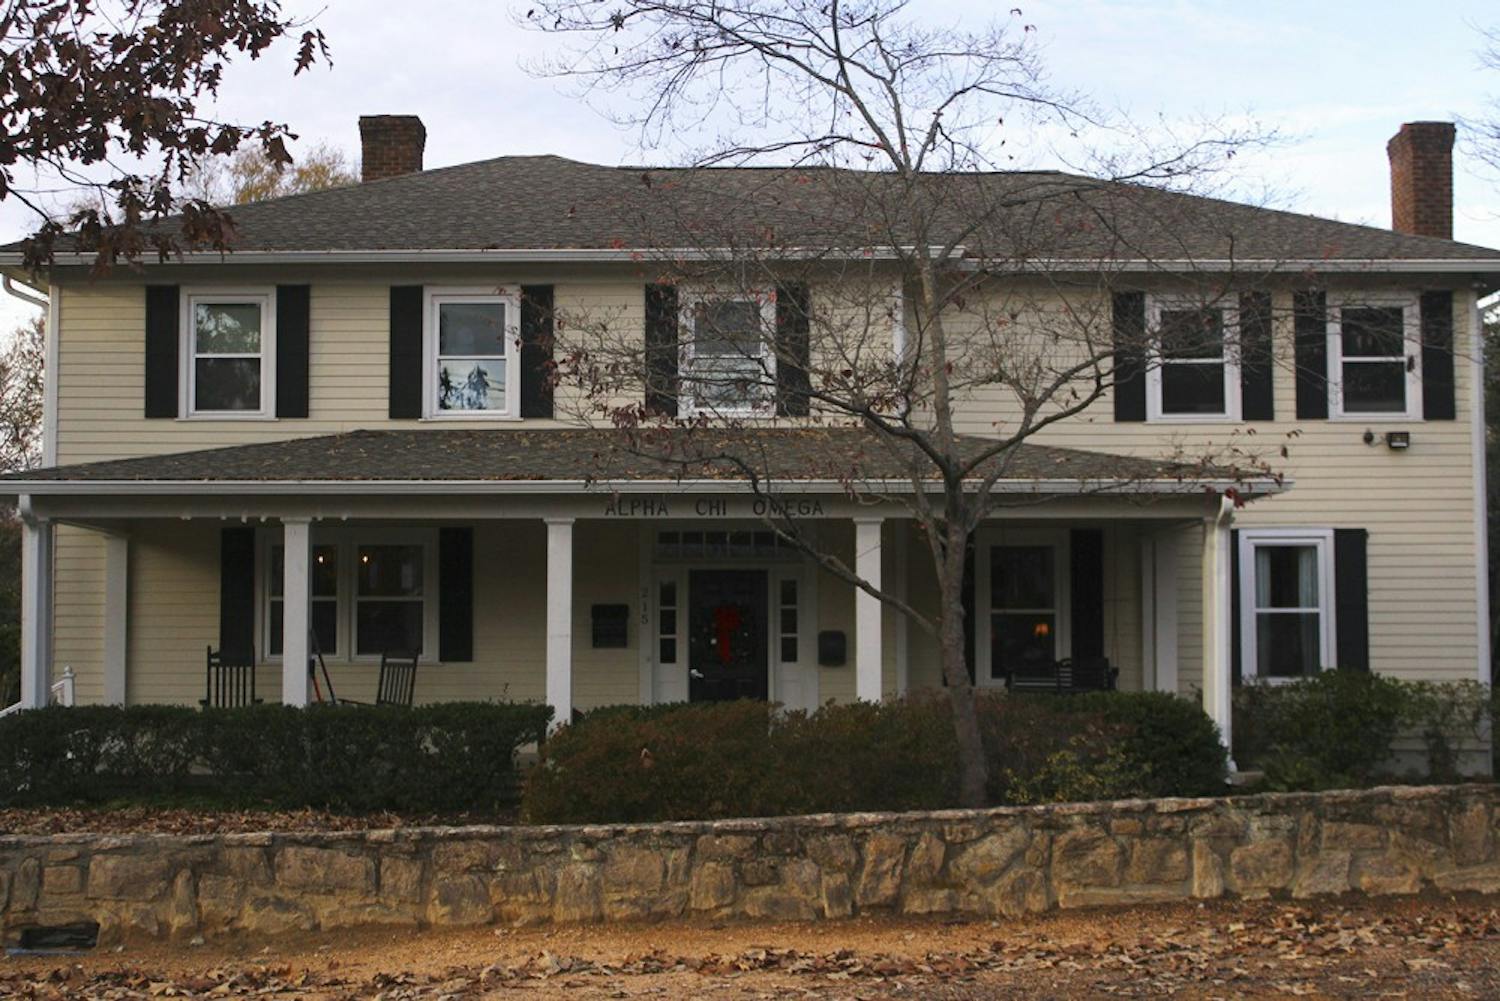 Alpha Chi Omega now will allow anyone who identifies as a woman to join their sorority.&nbsp;